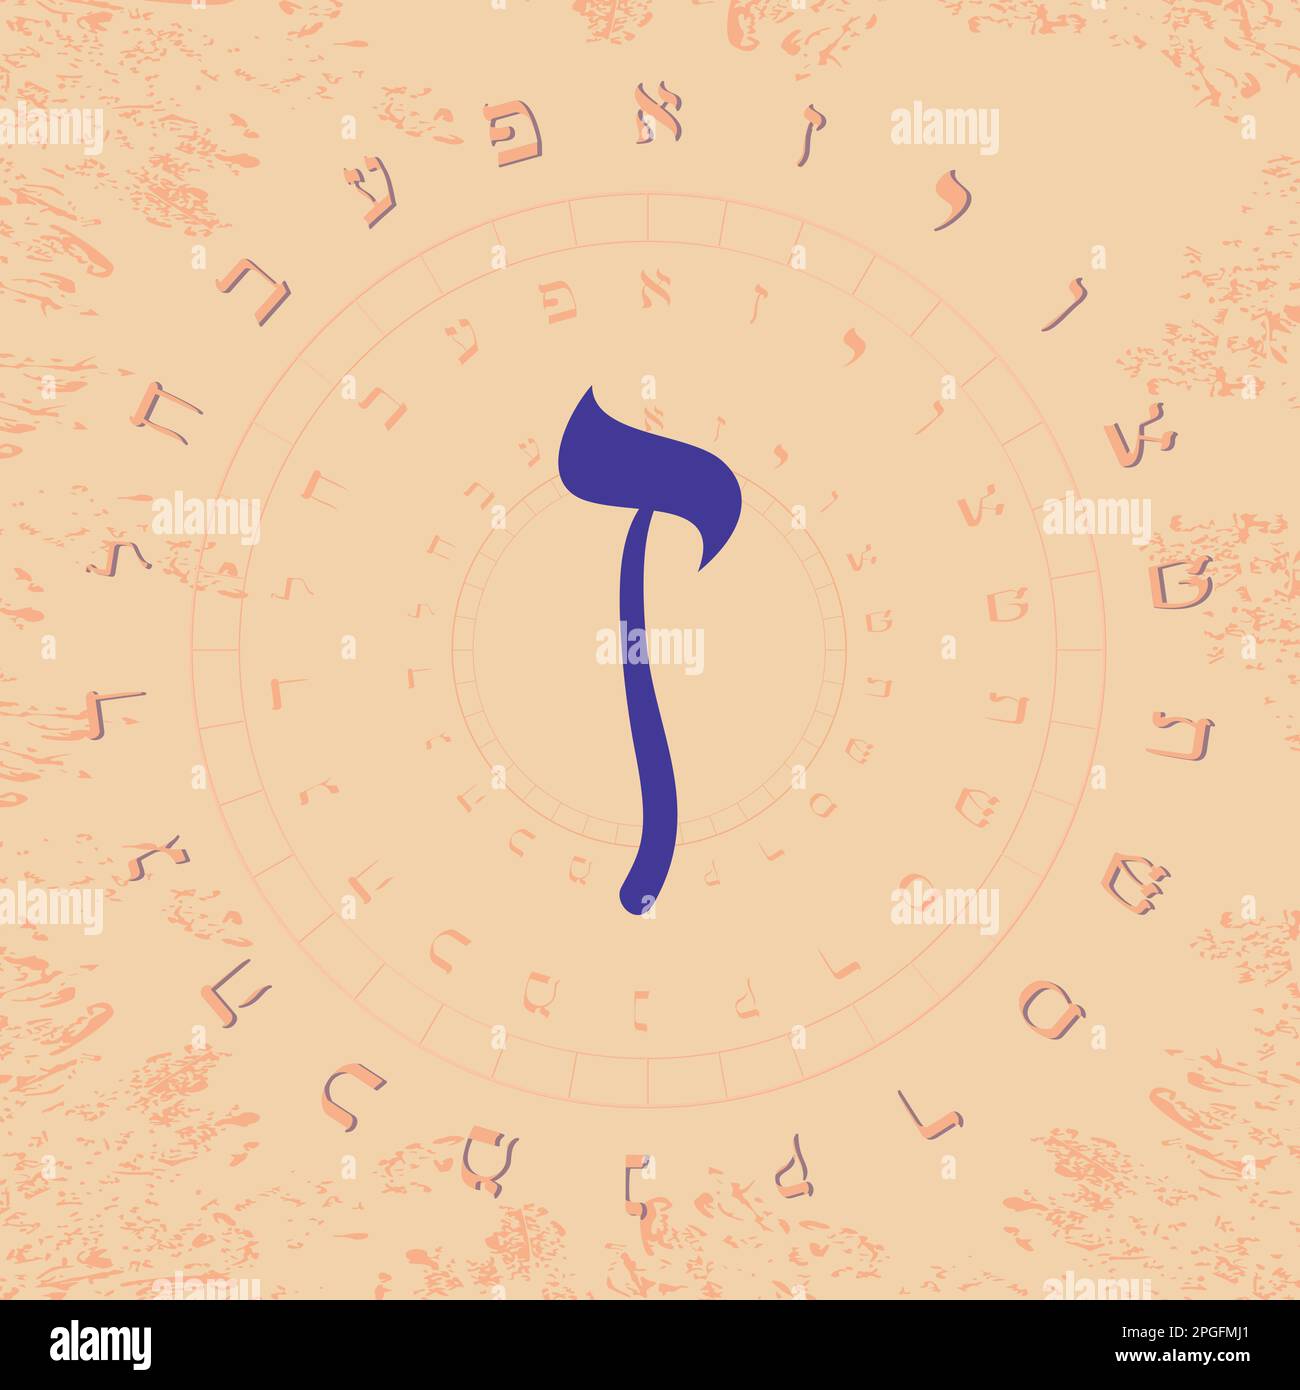 Vector illustration of the Hebrew alphabet in circular design. Hebrew letter called Zayin large and blue. Stock Vector